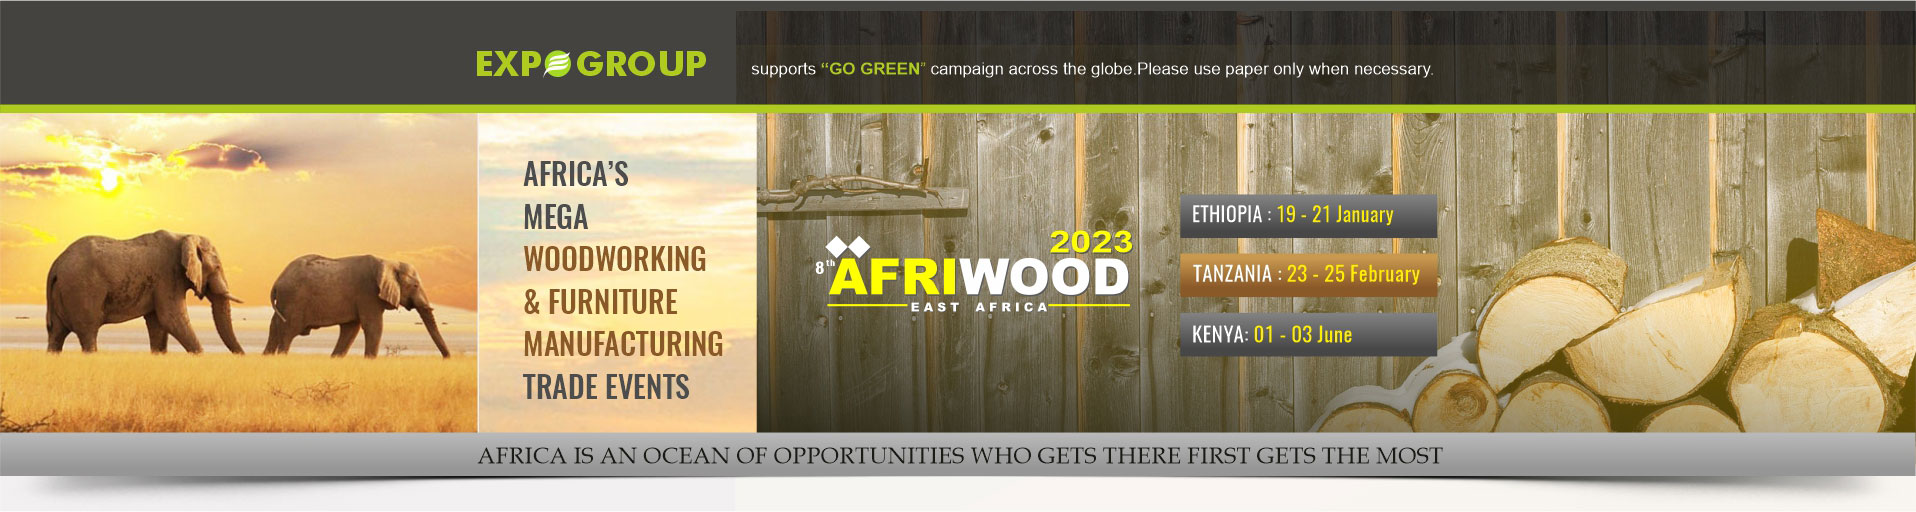 Afriwood 2023 - Click here for more info